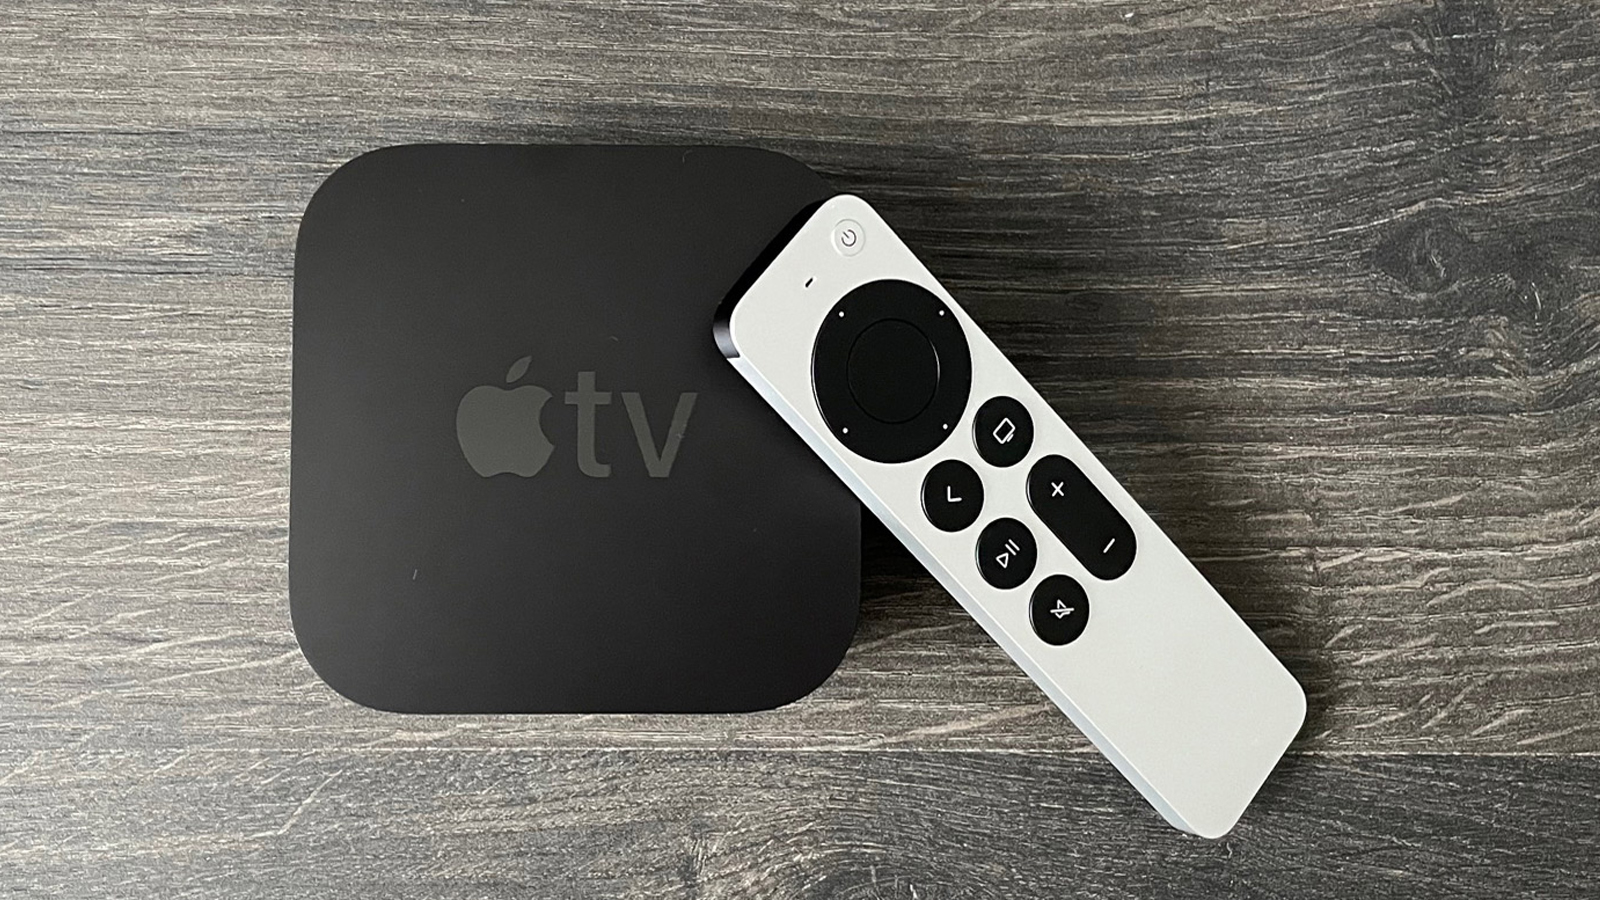 The Apple TV 4K 2021 and the remote are on a table